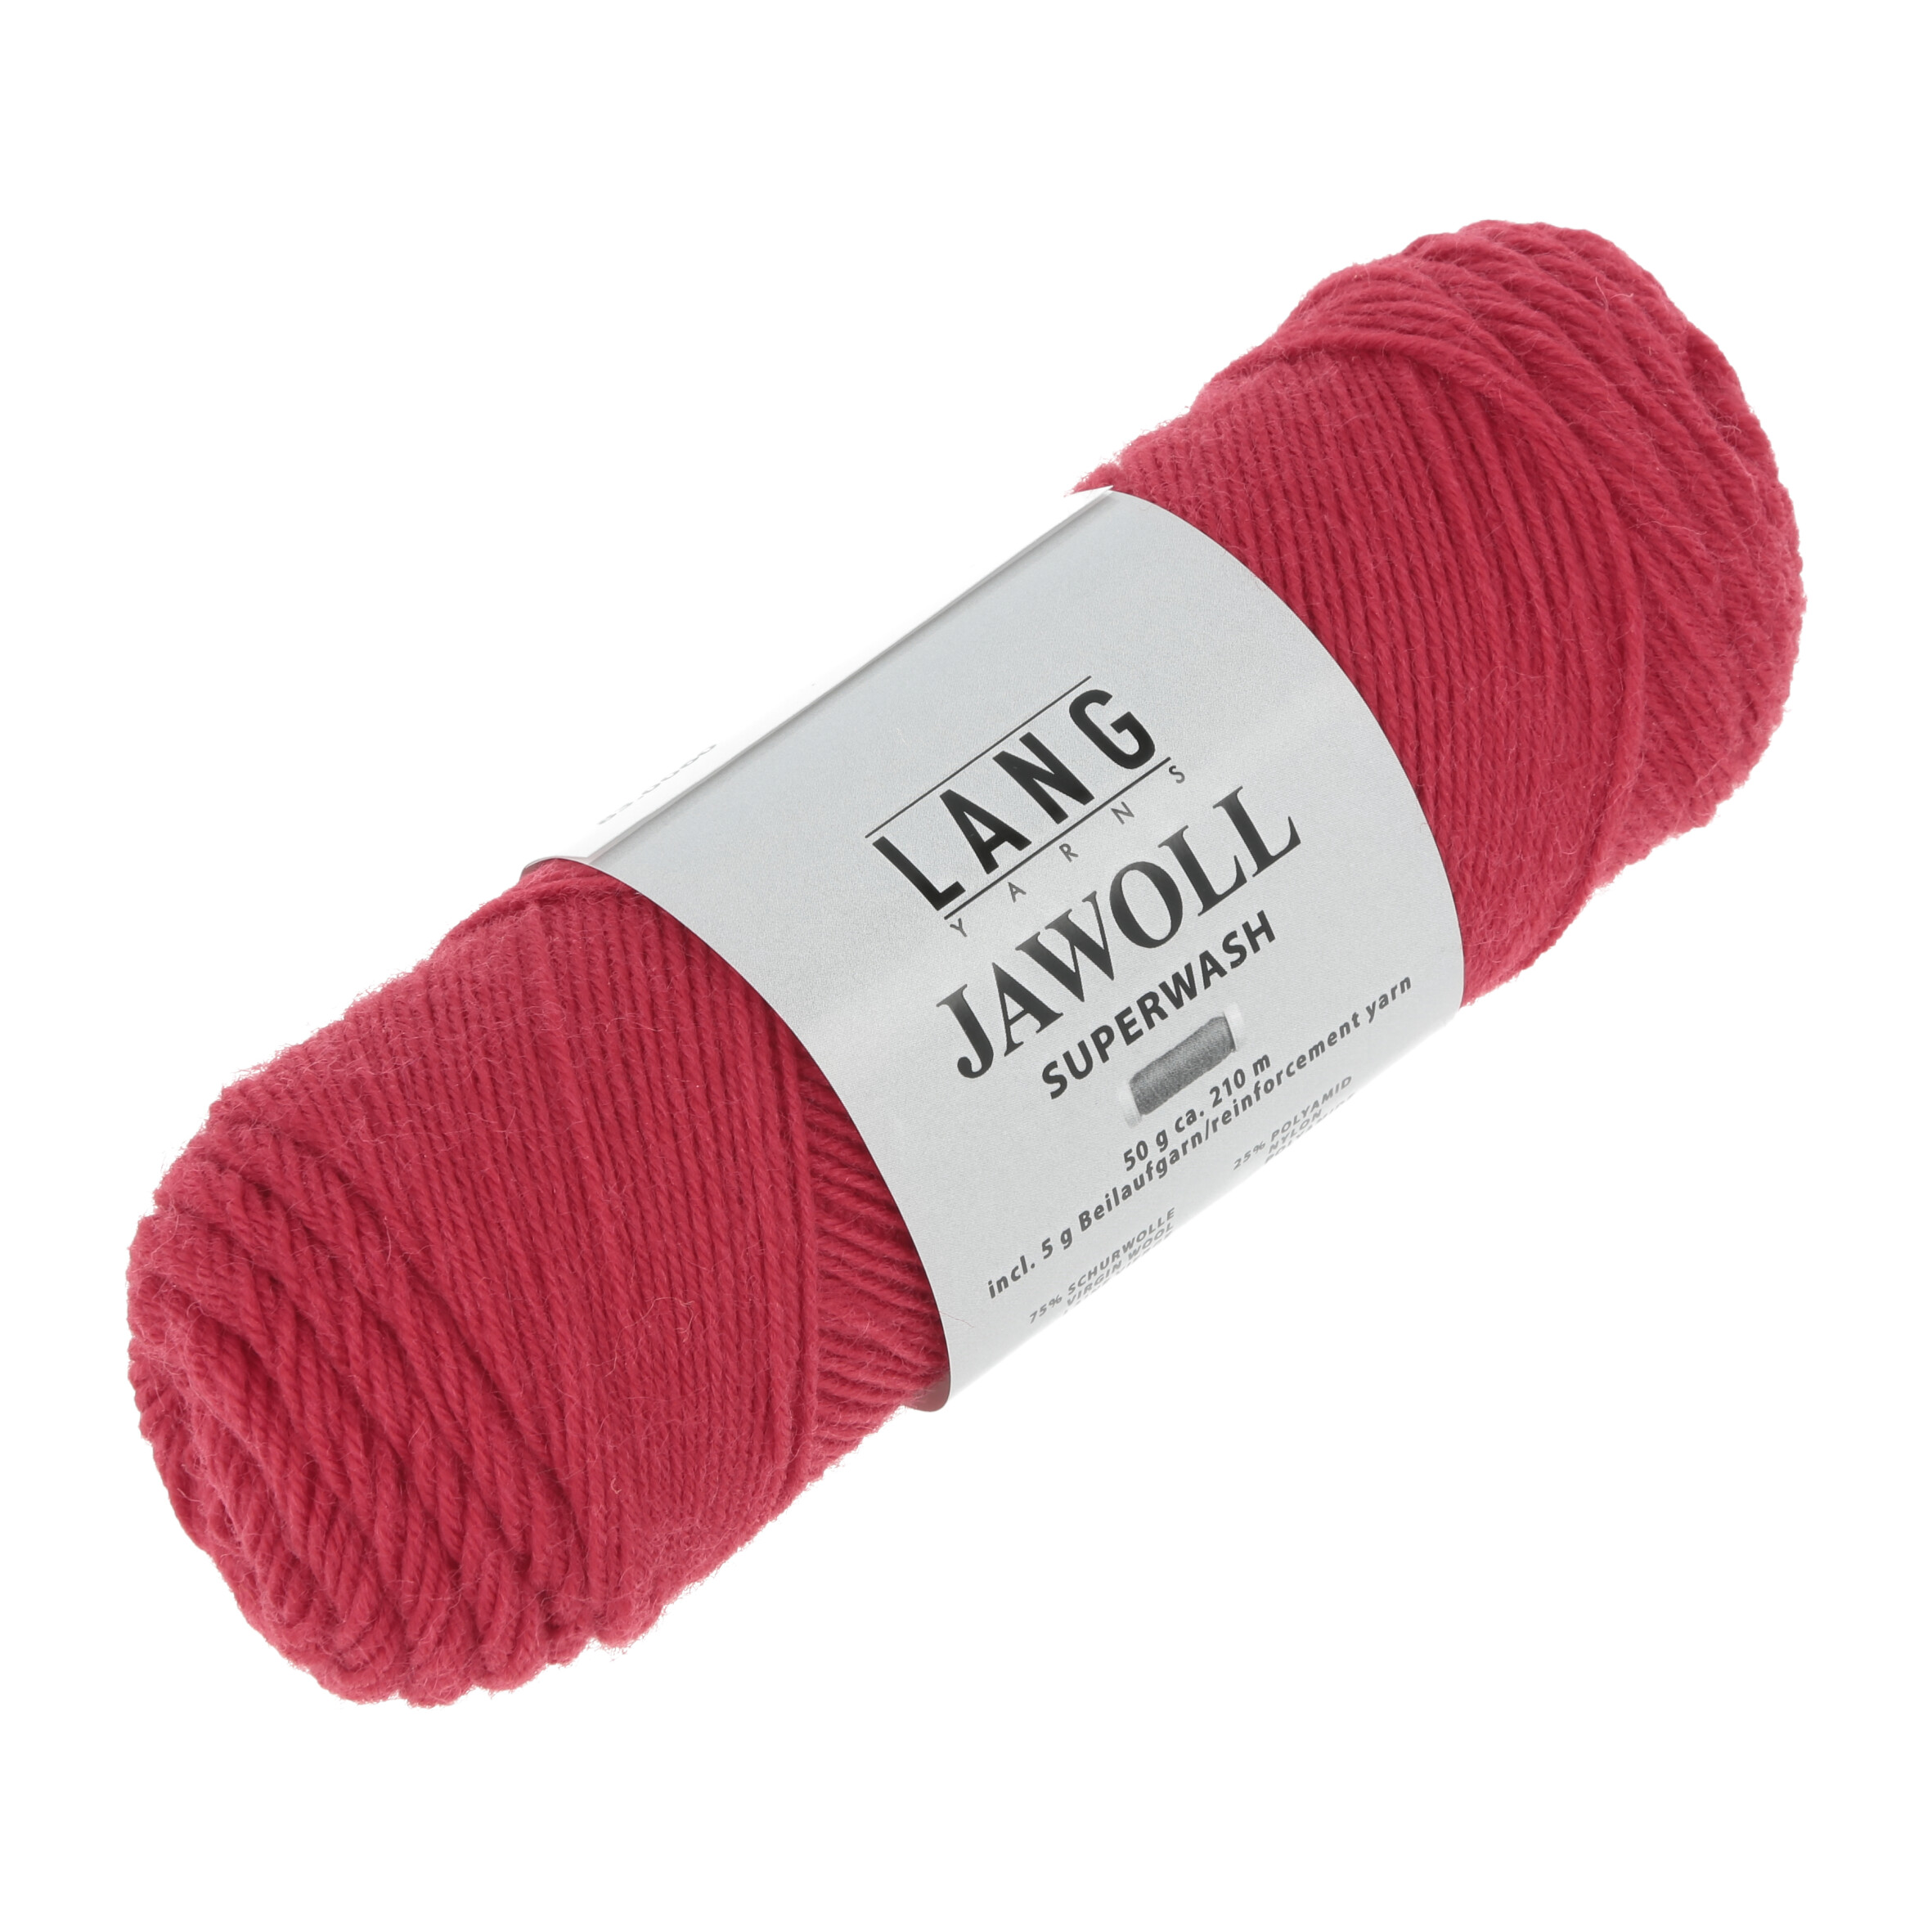 LANG JAWOLL 50GR 0060 ROSSO